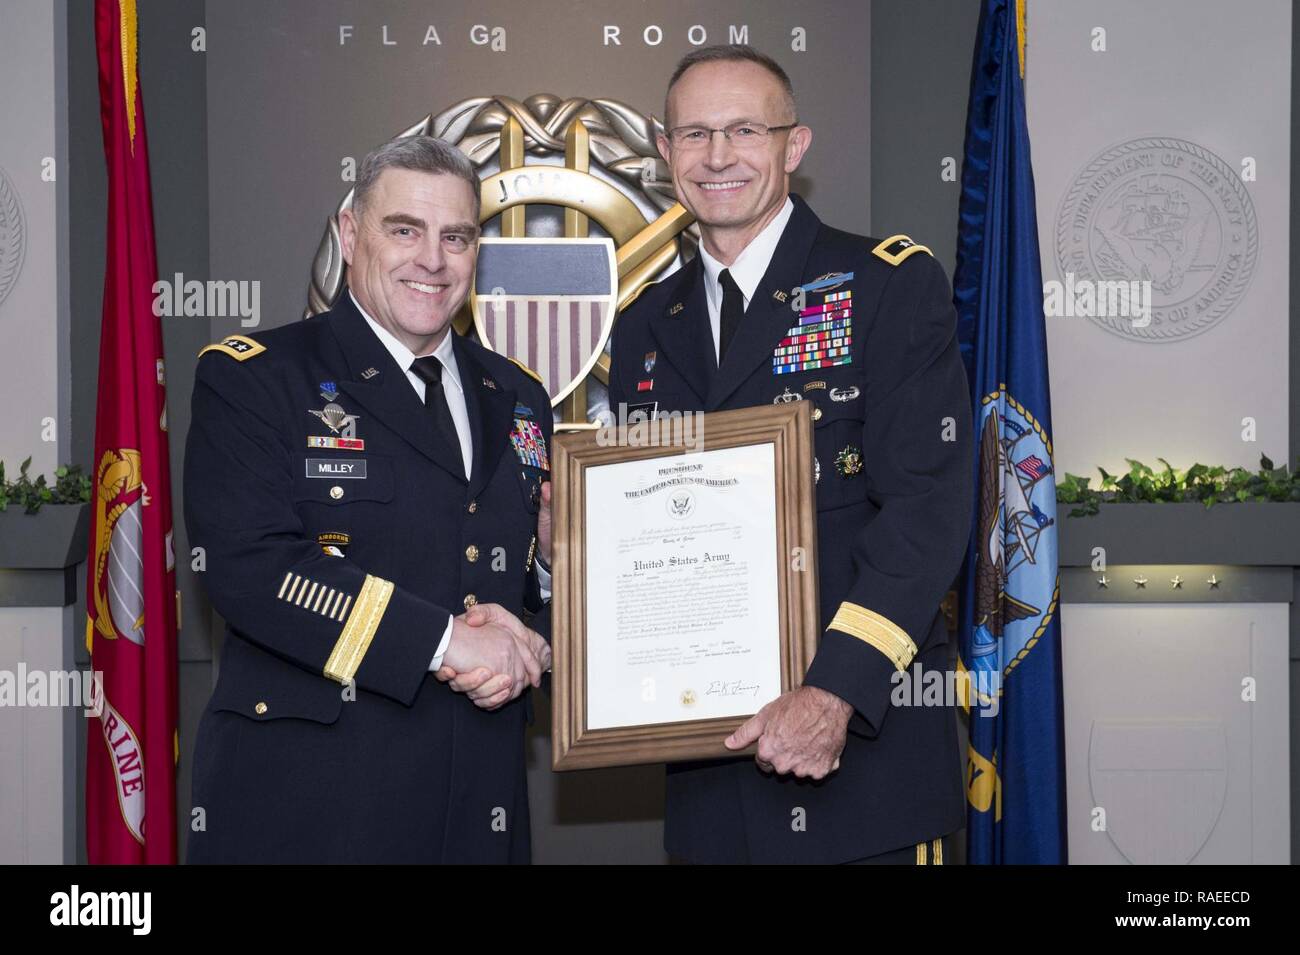 U.S. Army Chief of Staff, Gen. Mark A. Milley and Brig. Gen. Randy A. George during a promotion ceremony in the Pentagon, Arlington, Va., Jan. 12, 2017. Stock Photo